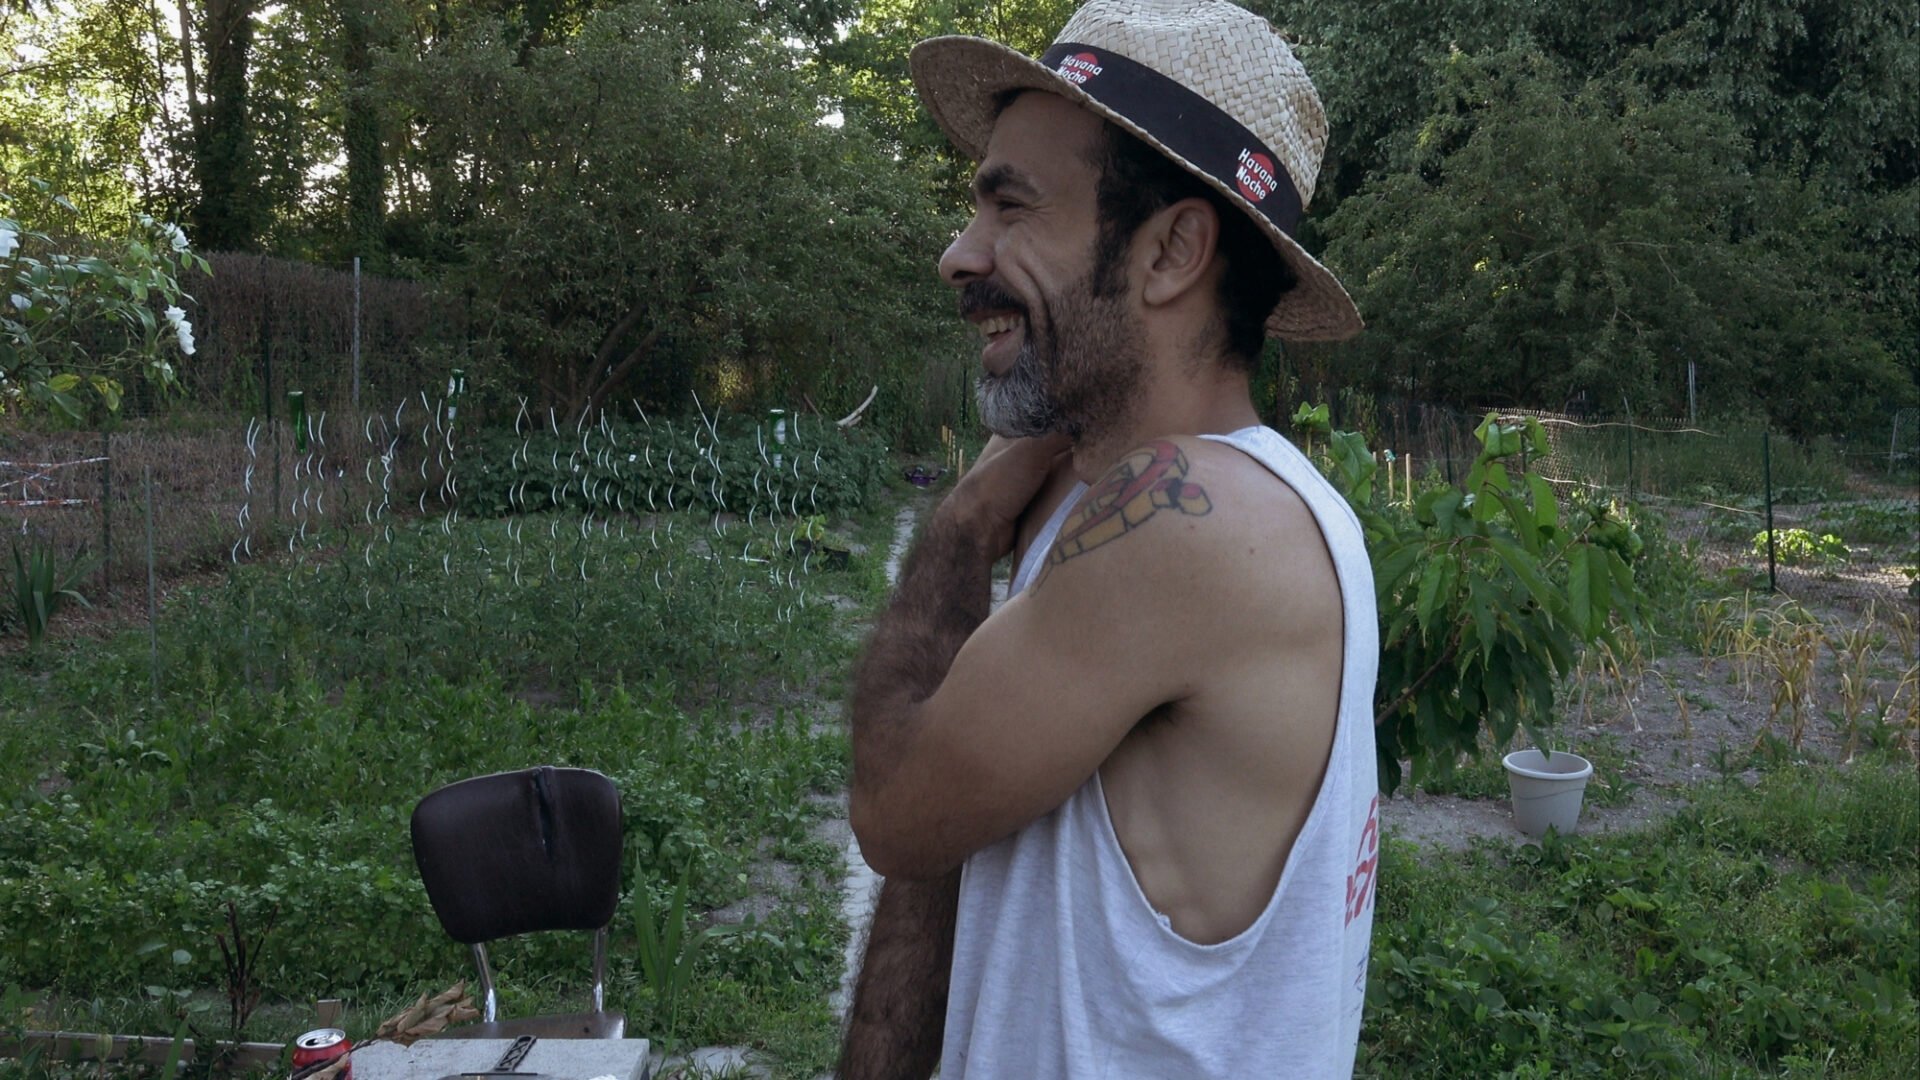 'Gevar's Land' follows the labor-filled days of Gevar, a Syrian refugee who grows vegetables in a hobby garden in France.